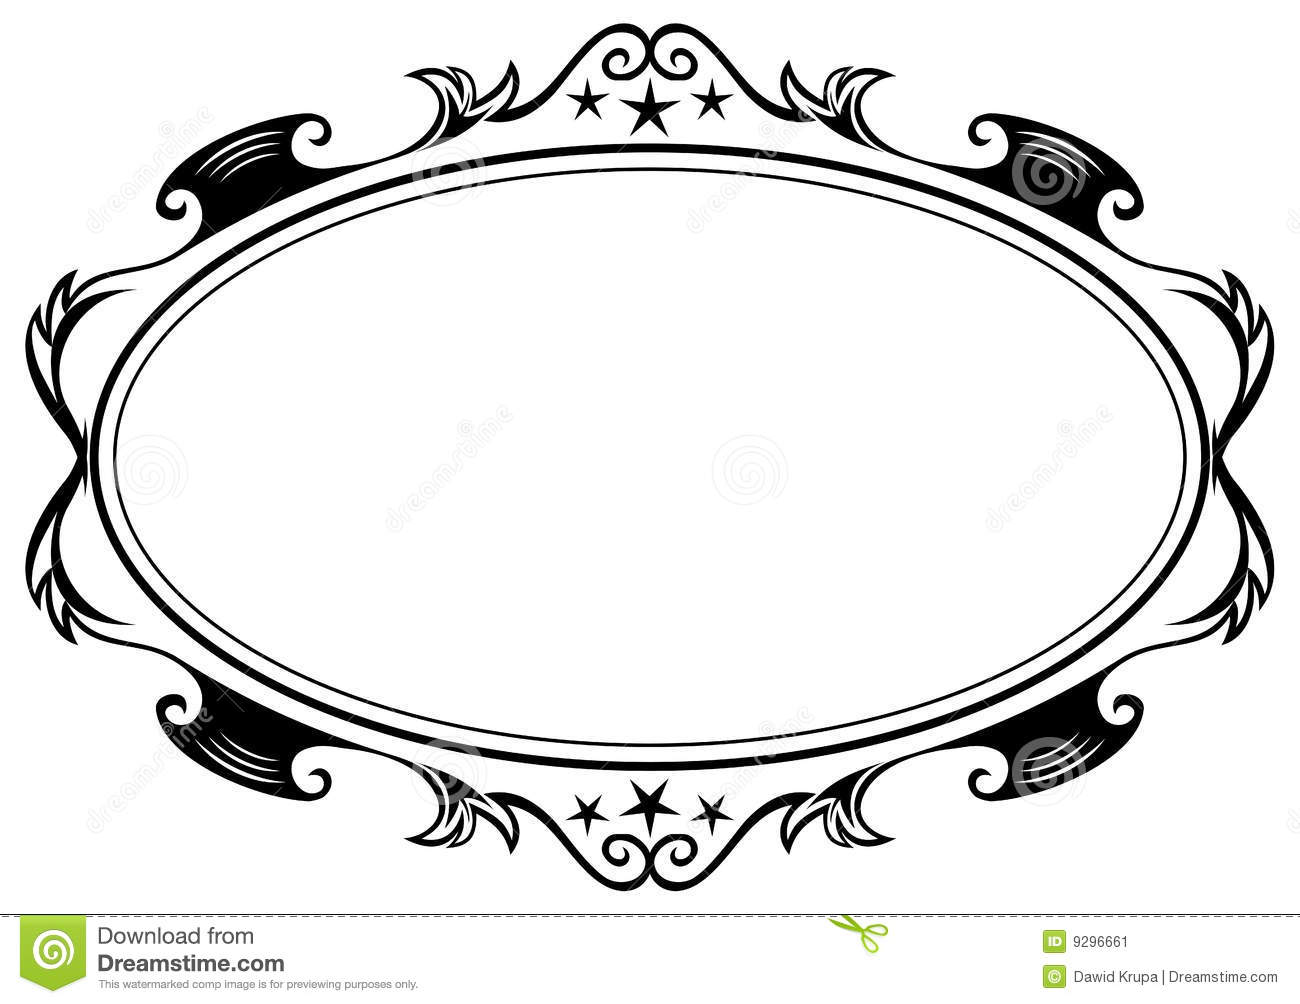 Antique Oval Frame Silhouette   Clipart Panda   Free Clipart Images